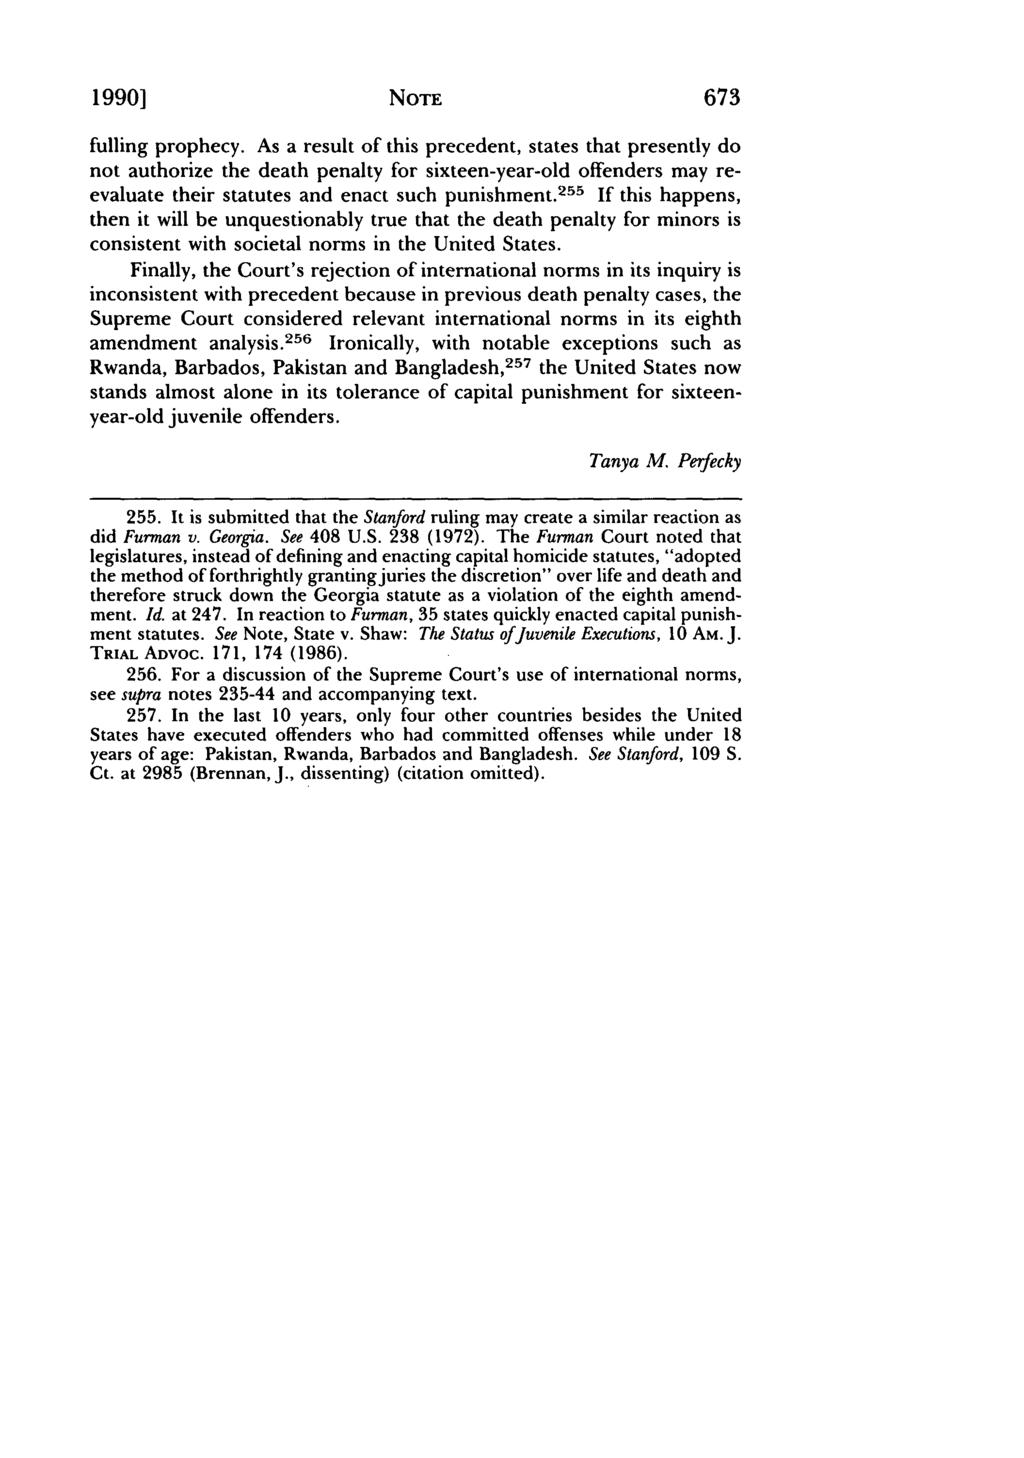 Perfecky: Children, the Death Penalty and the Eighth Amendment: An Analysis 1990] NOTE 673 fulling prophecy.